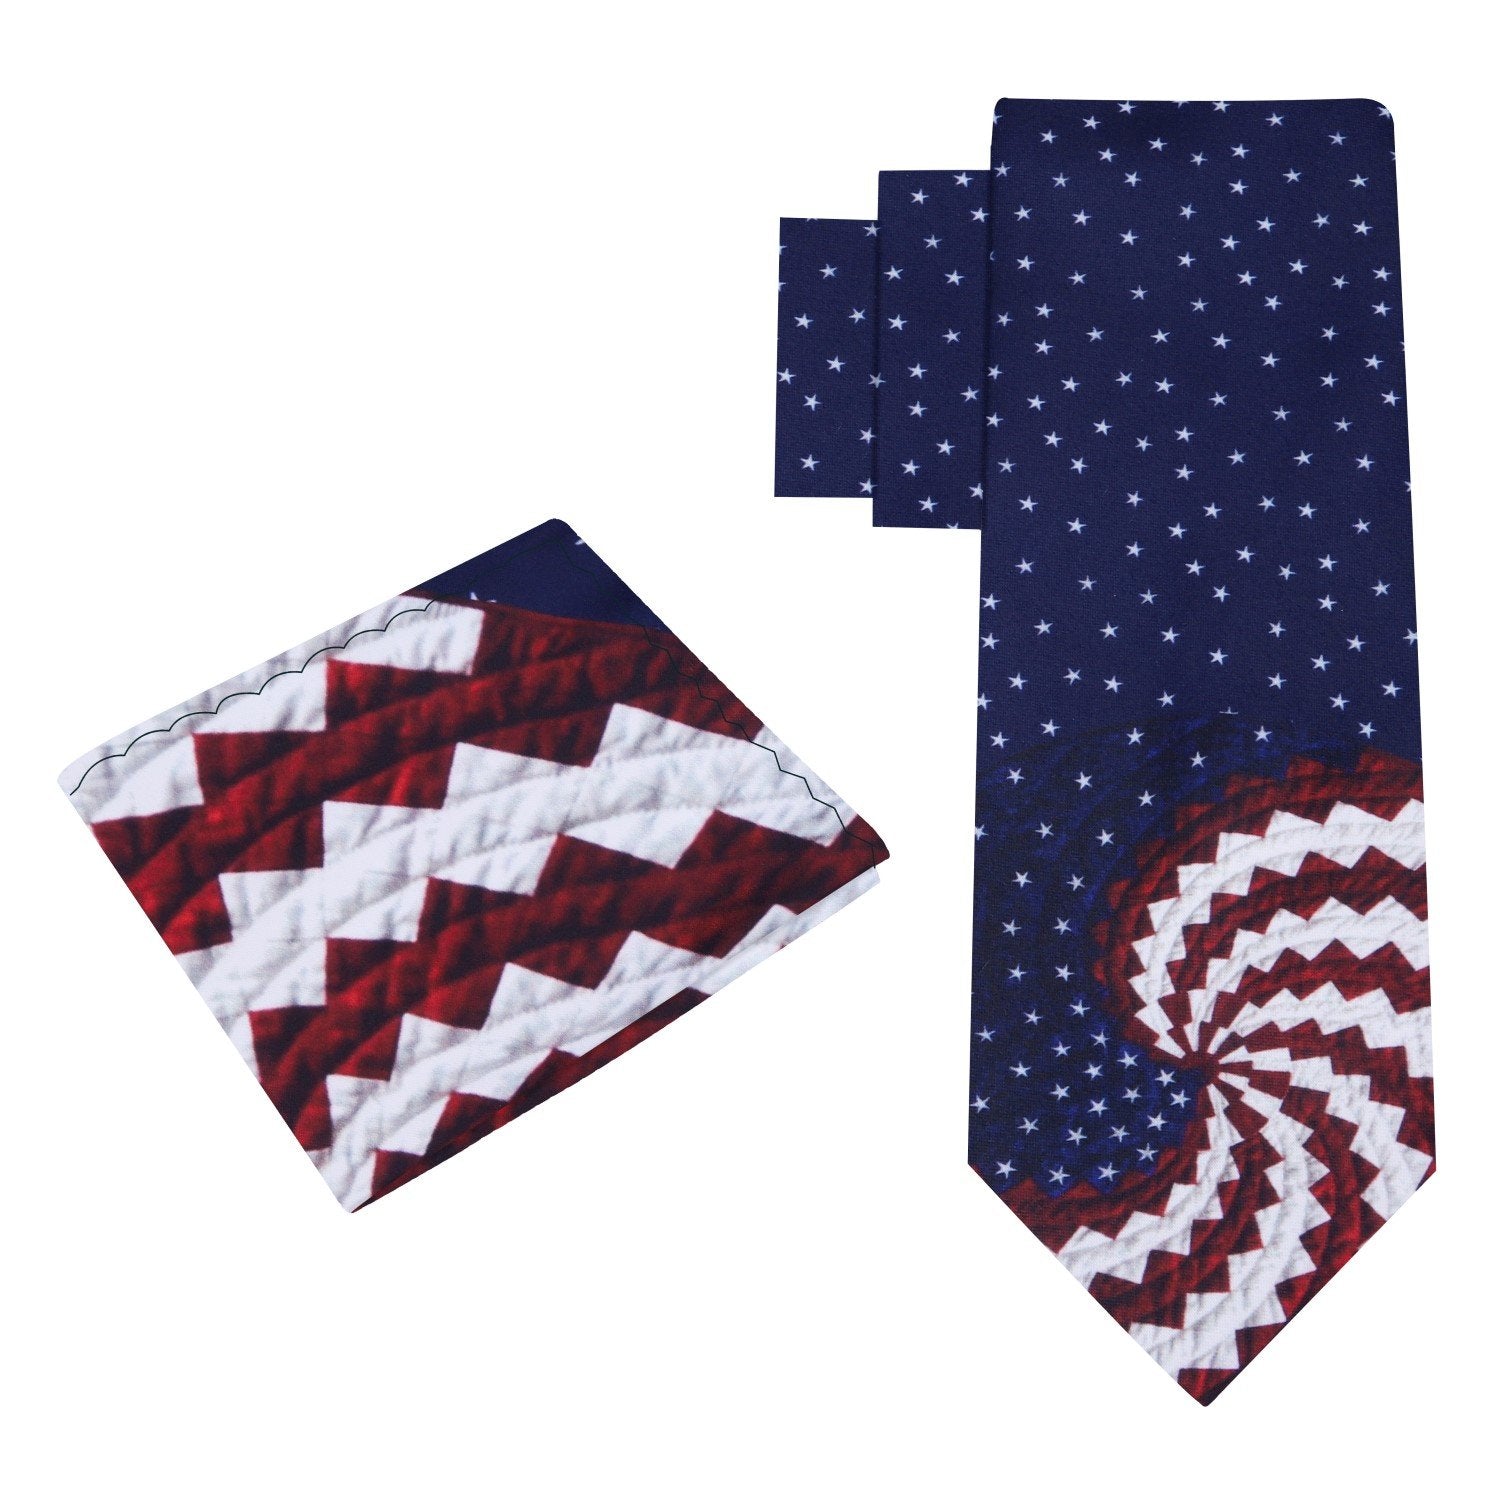 Alt View: Blue, Red, White American Flag Swirl Tie and Pocket Square